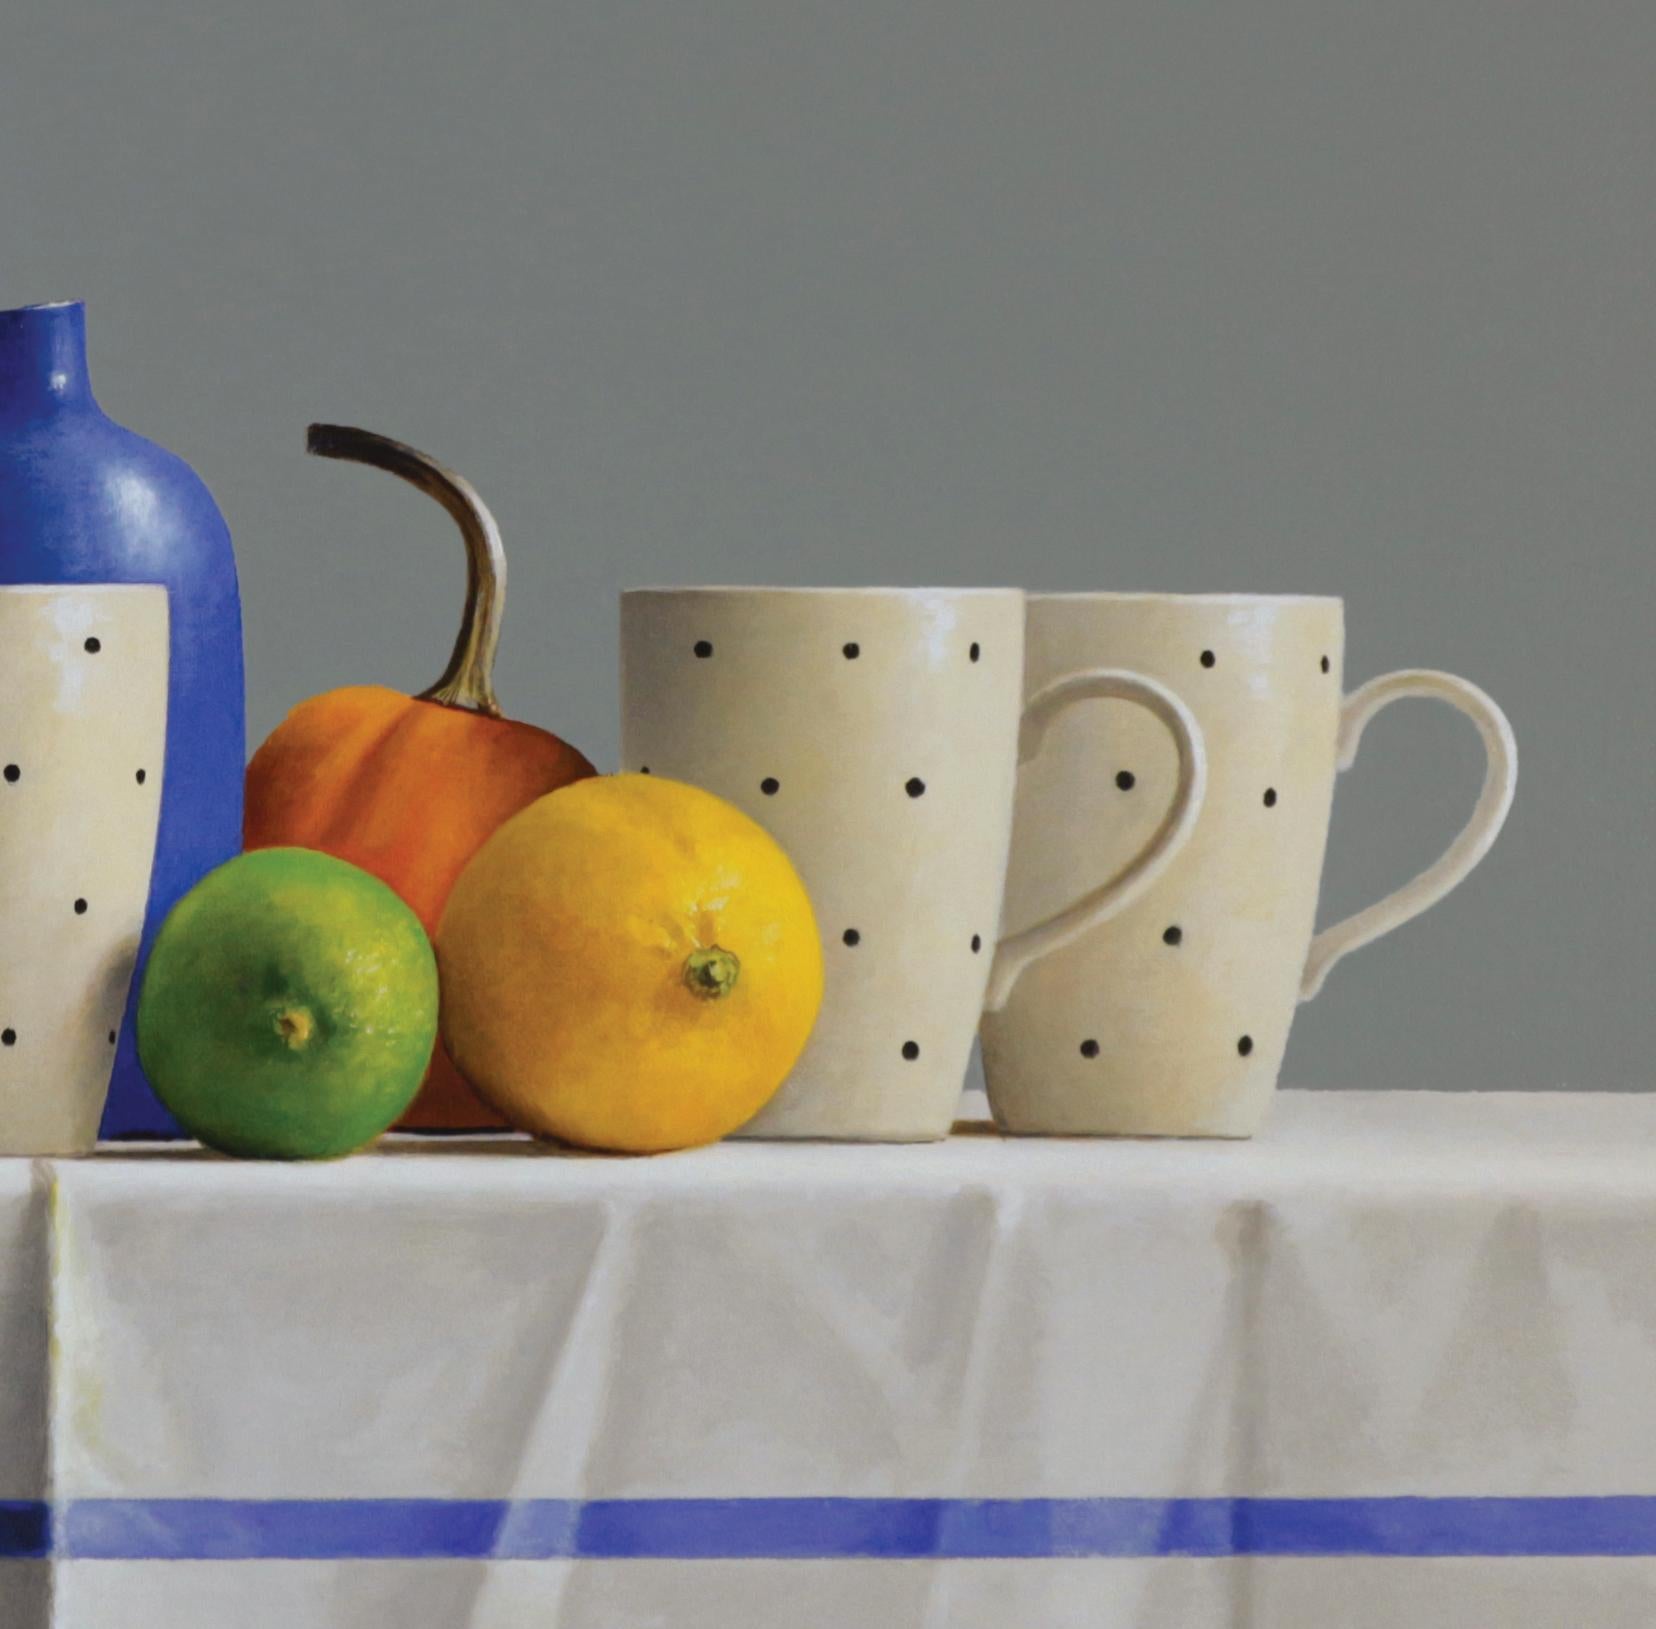 FOUR POLKA DOT CUPS, FRUIT, CUPS ON TABLE, BLUE, YELLOW, WHITE, PORCELAIN  - American Realist Painting by Janet Rickus